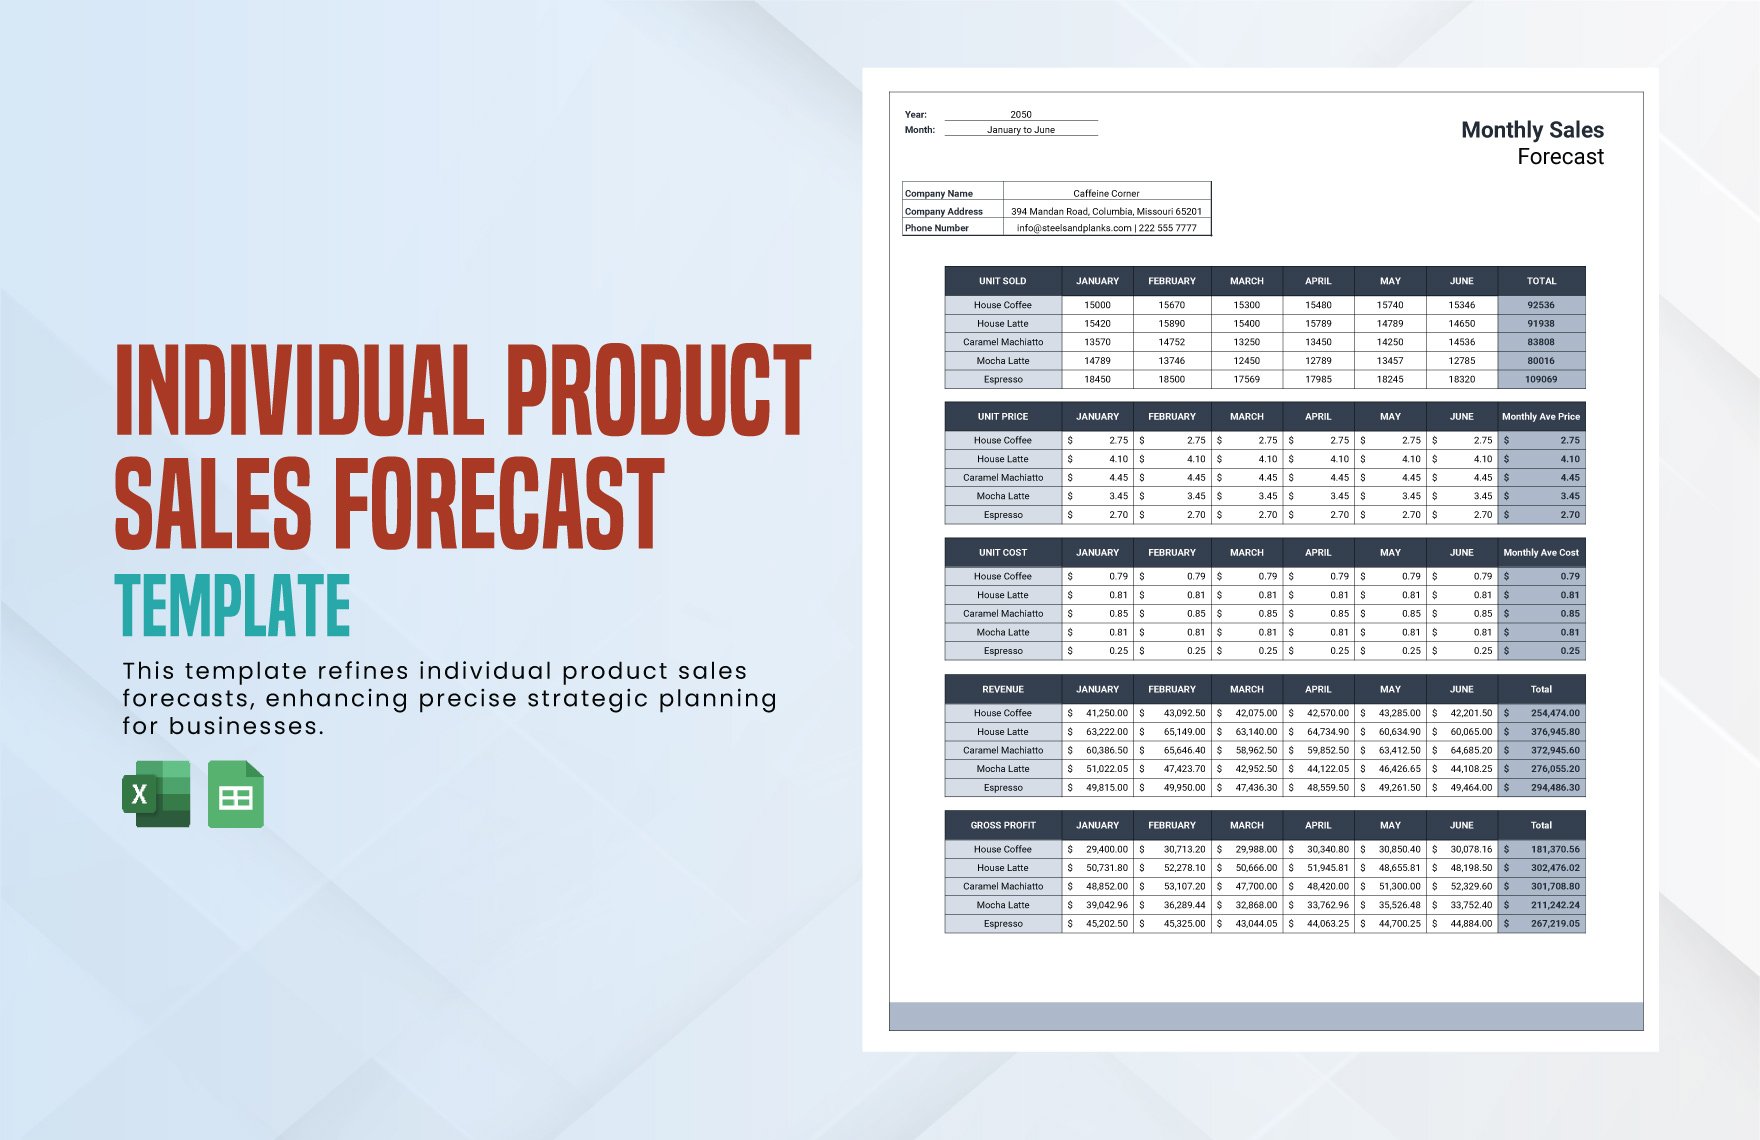 Individual Product Sales Forecast Template